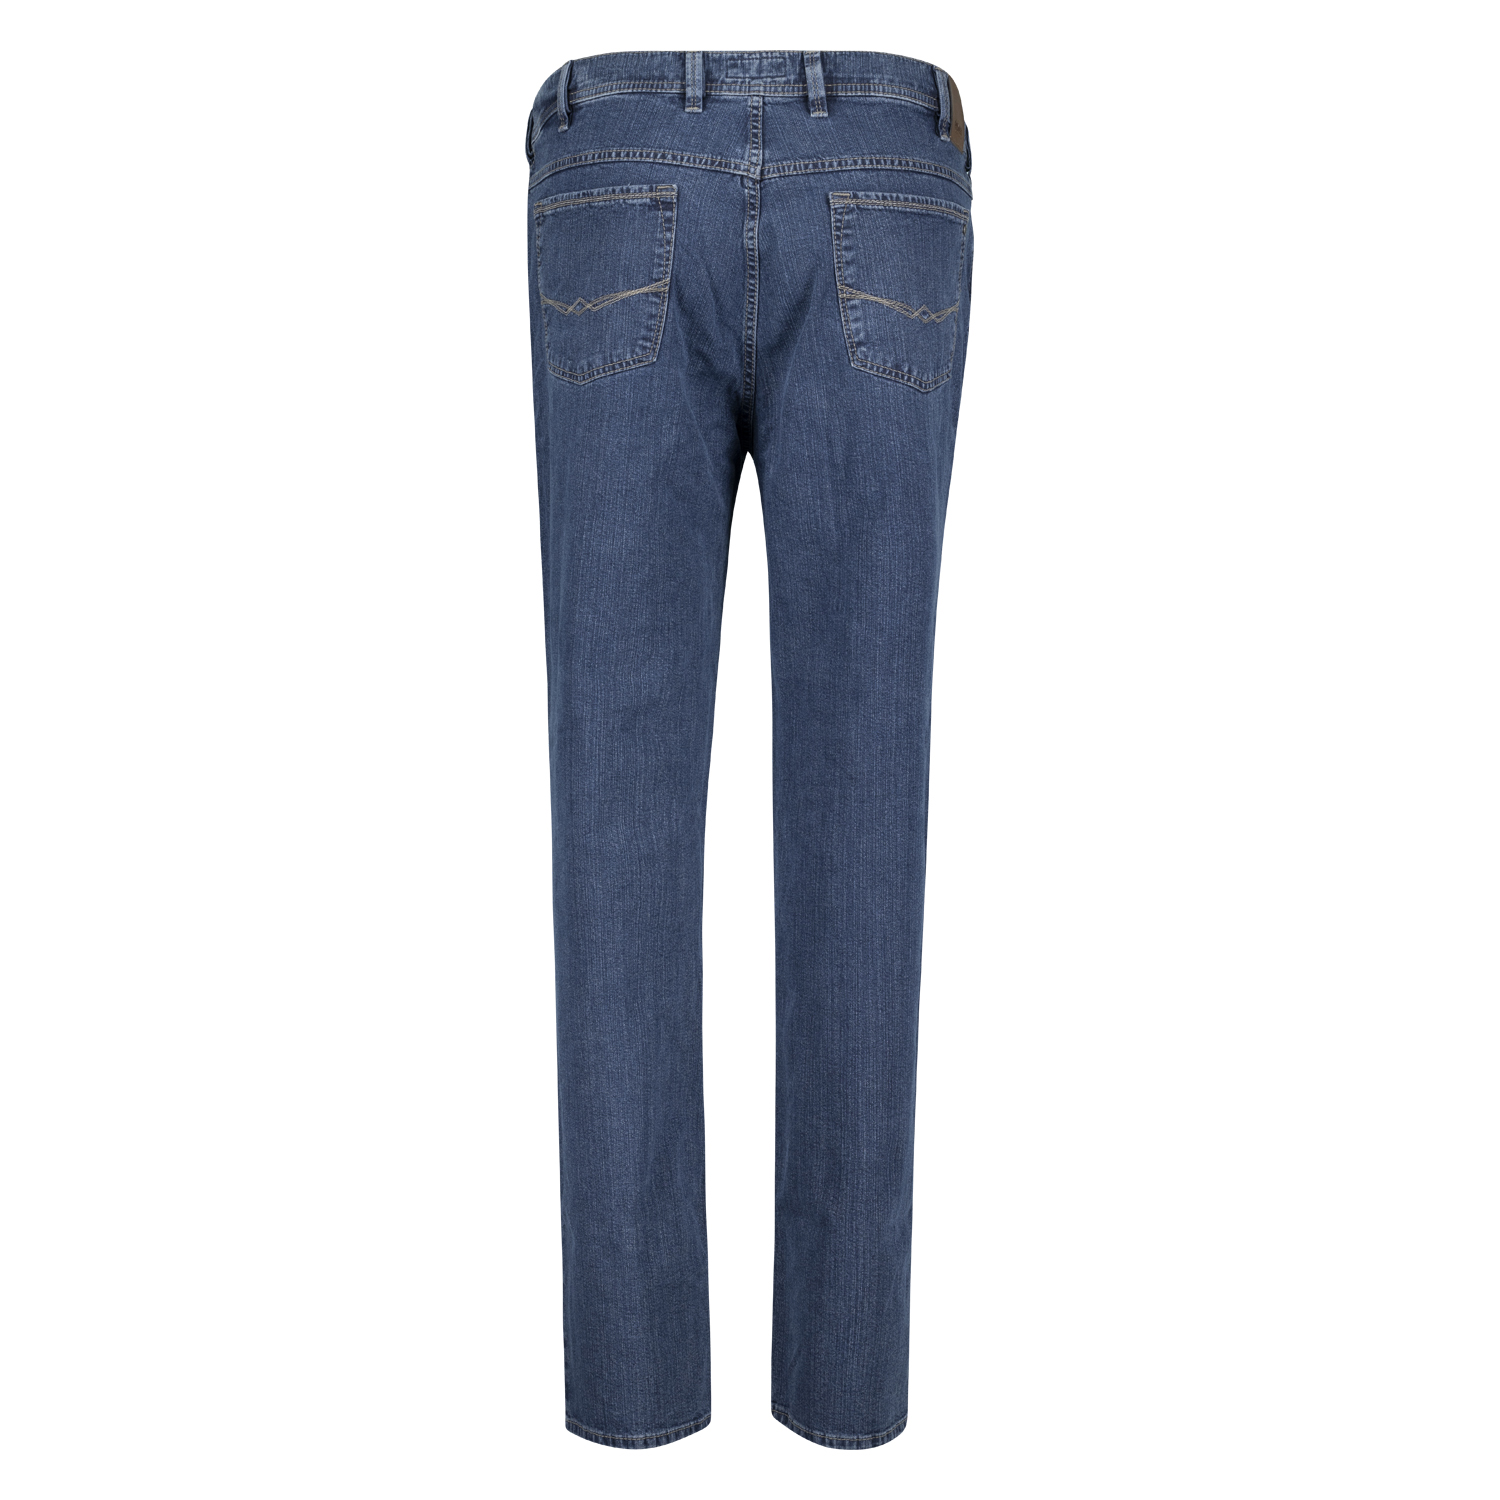 Five pocket jeans model "Peter" by Pioneer in oversize blue stonewash (low rise): 28 - 40